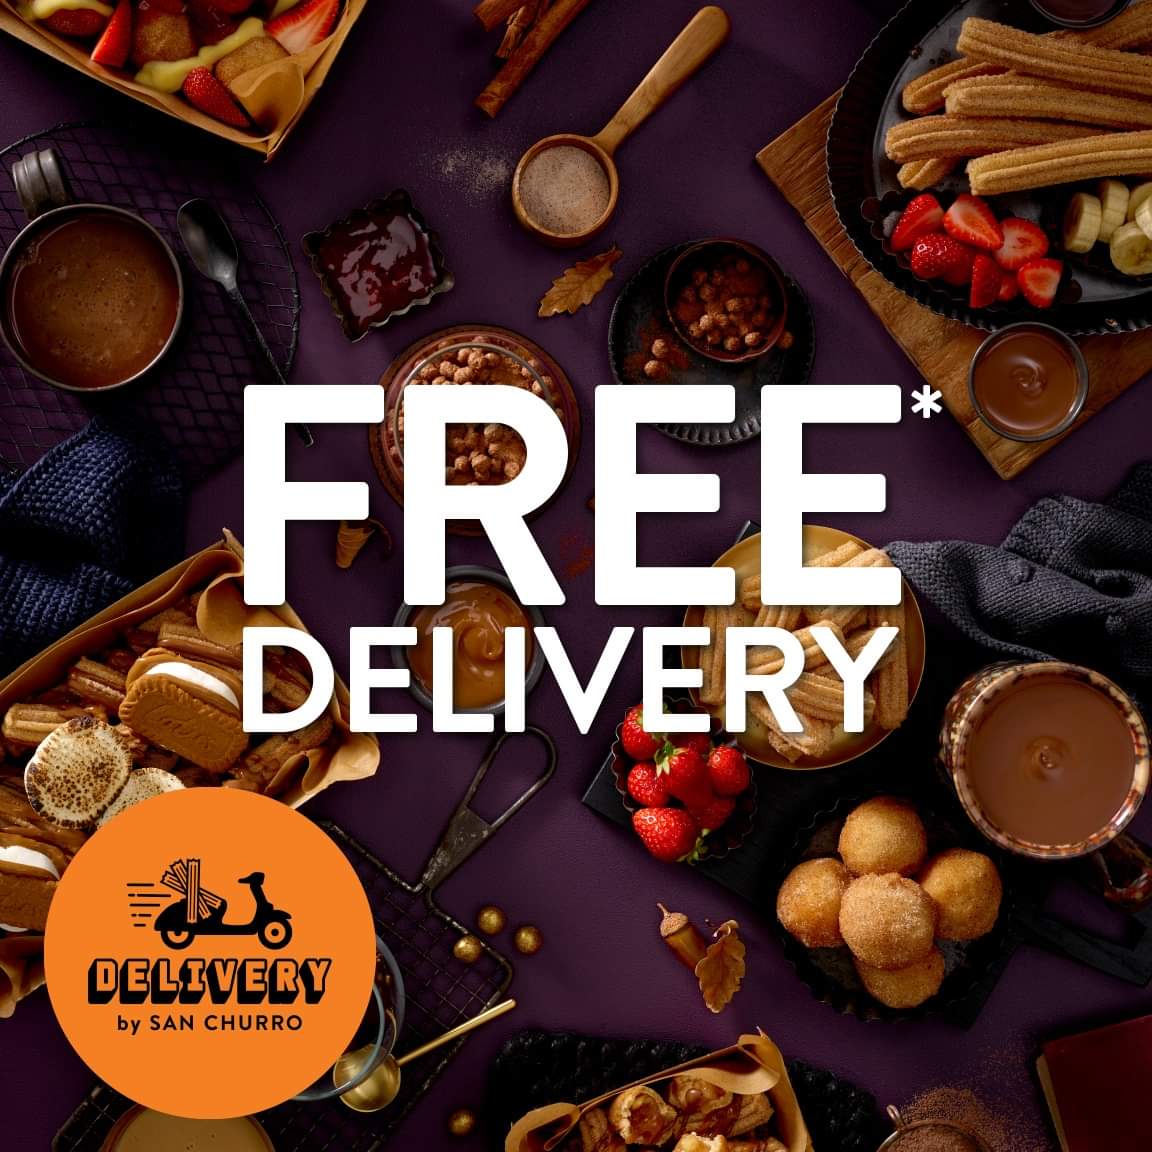 DEAL: San Churro - Free Delivery with No Minimum Spend via San Churro Delivery (until 22 August 2021) 11